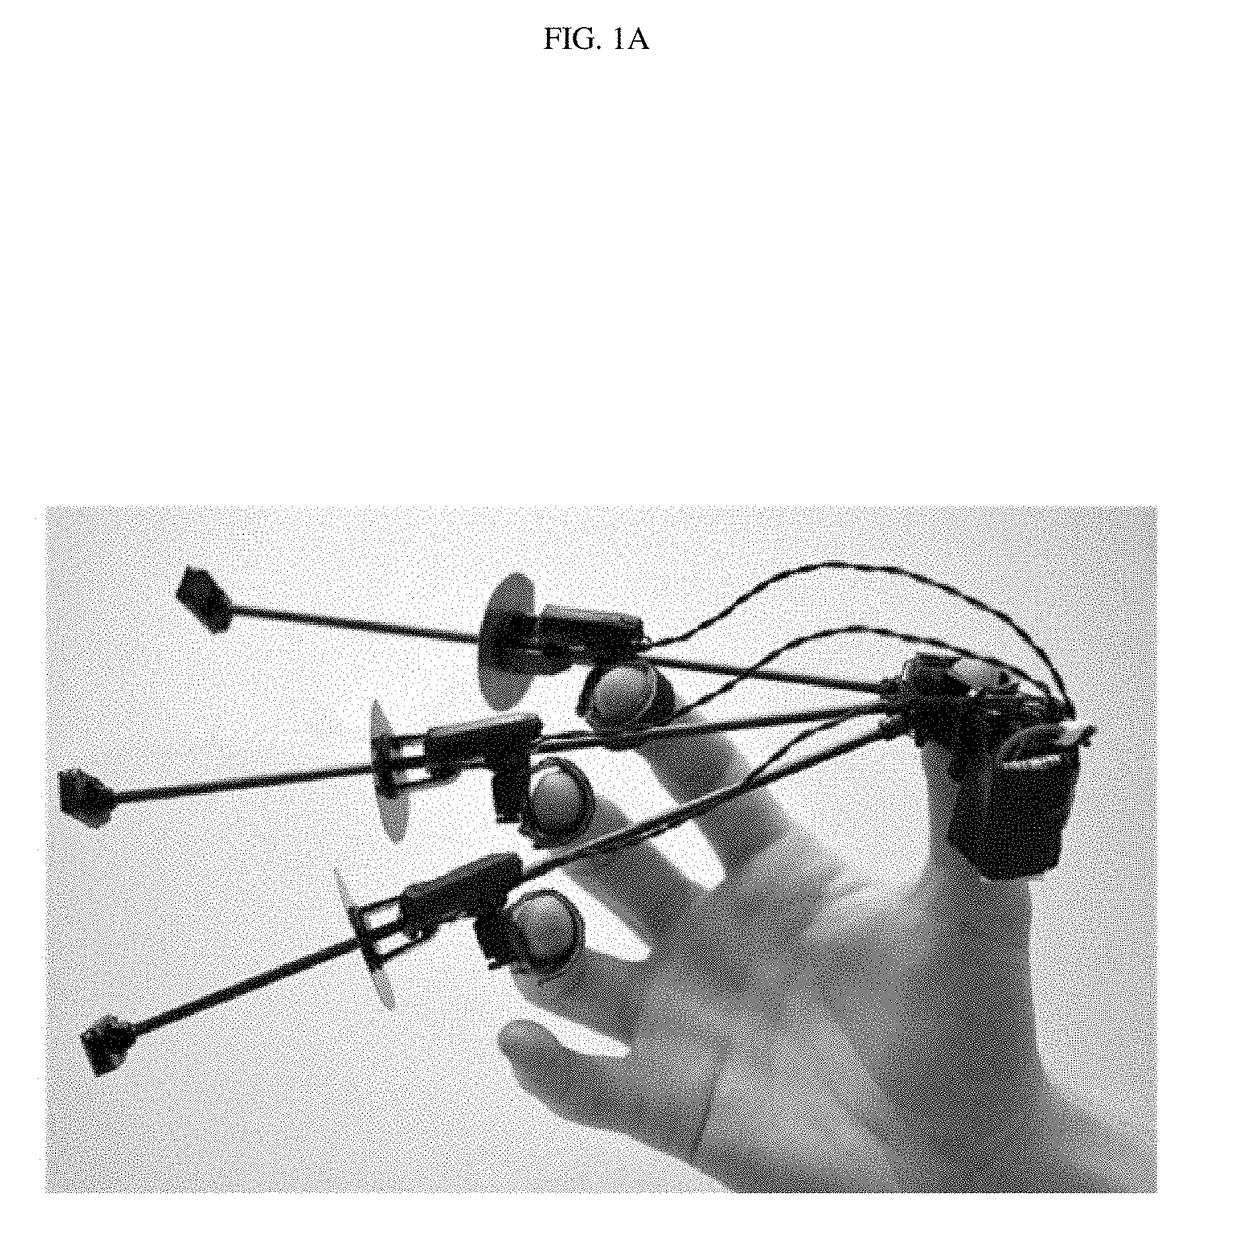 Wolverine: a wearable haptic interface for grasping in virtual reality